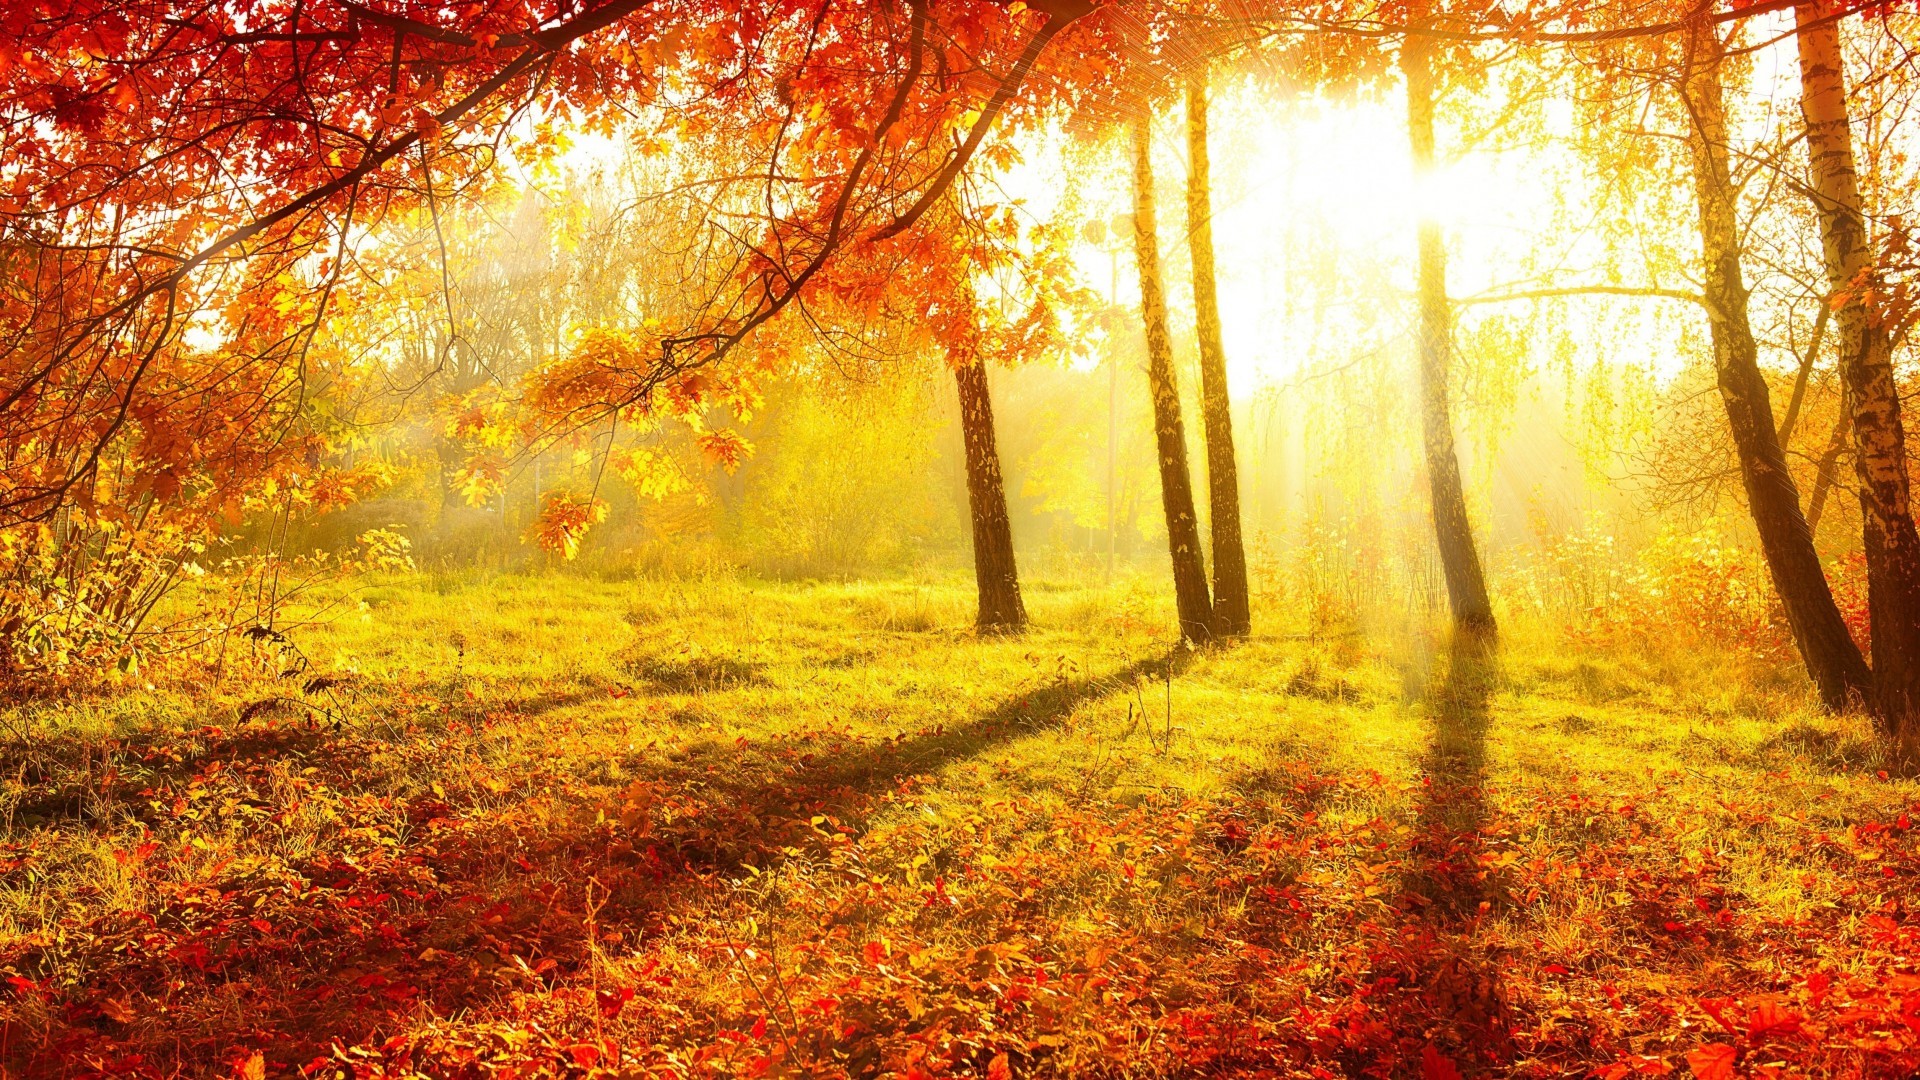 General 1920x1080 nature trees forest Sun sunlight leaves branch fall shadow grass plants